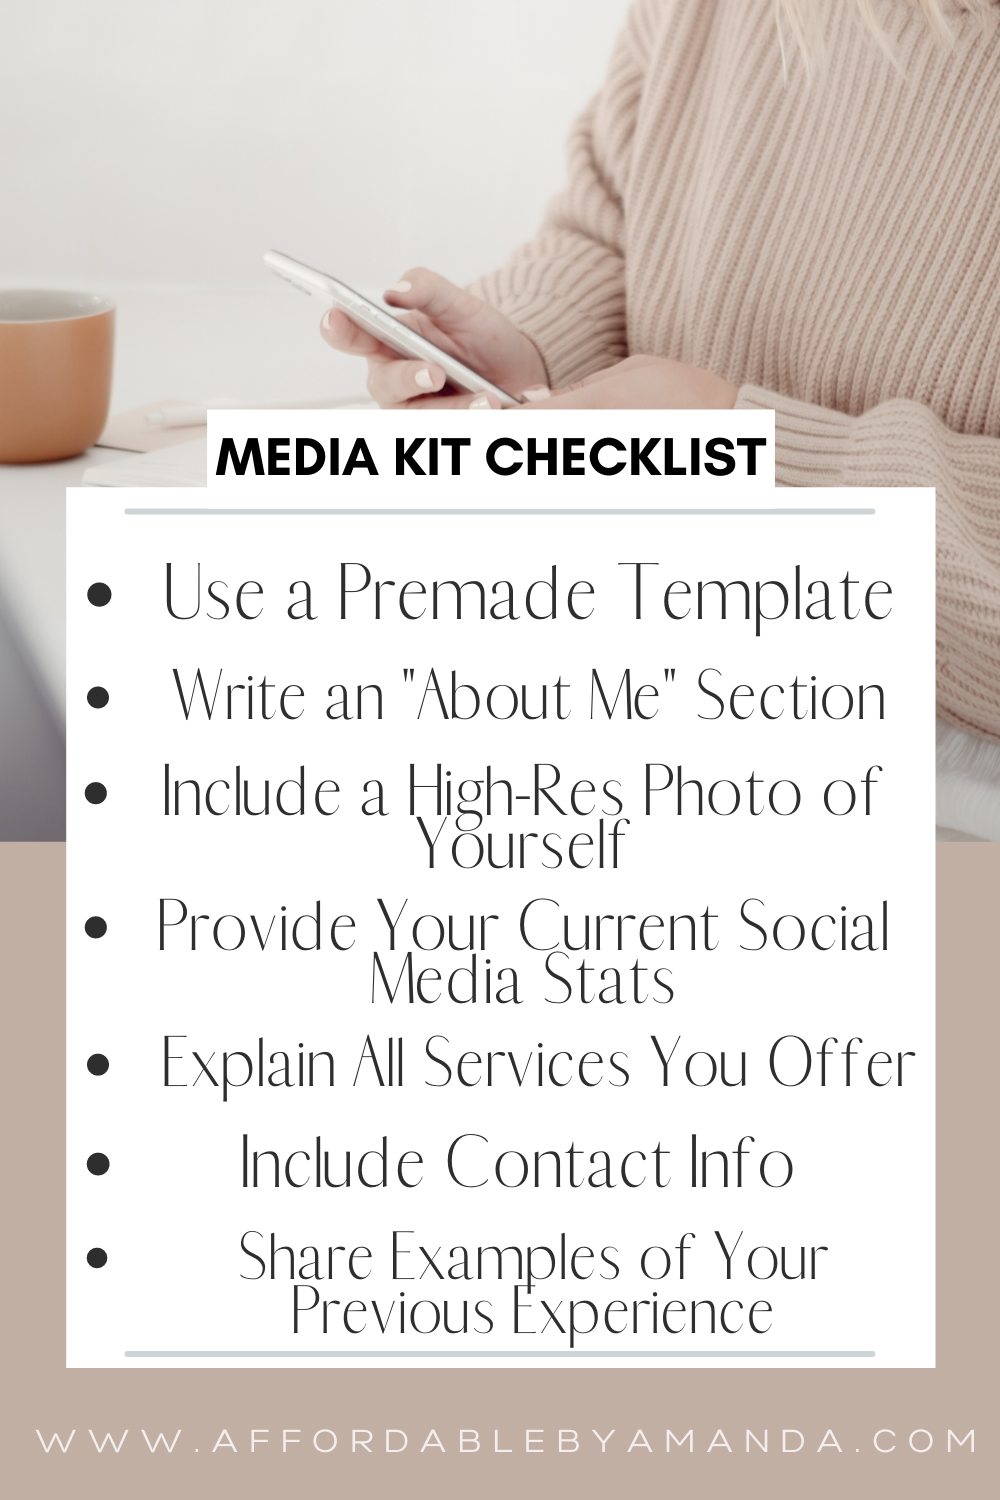 What To Include in Your Media Kit in 2021 - Affordable by Amanda